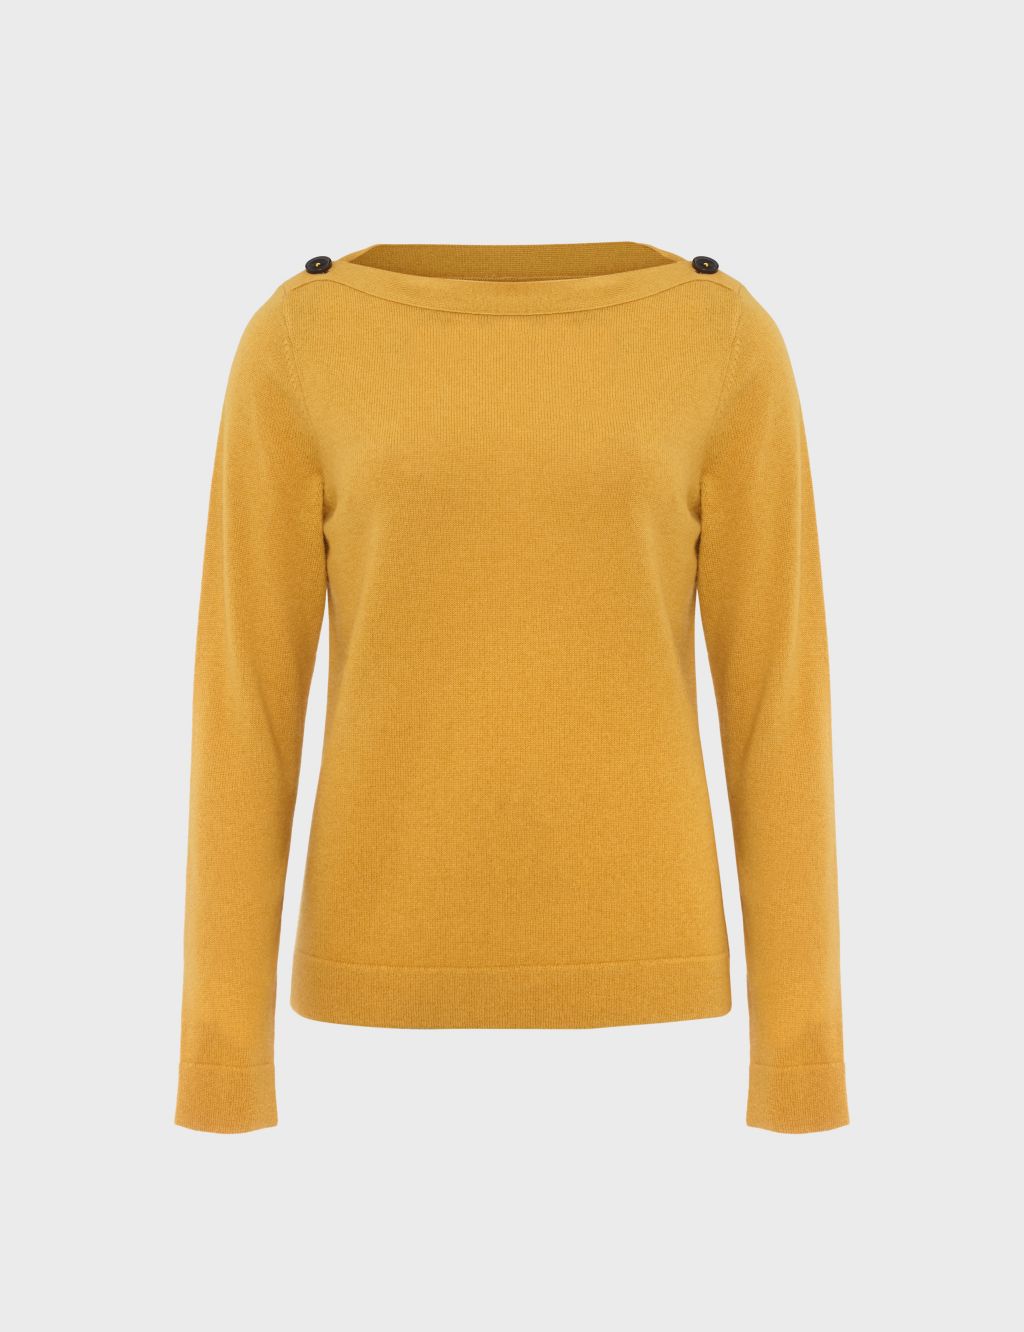 Merino Rich Wool Jumper with Cashmere image 2